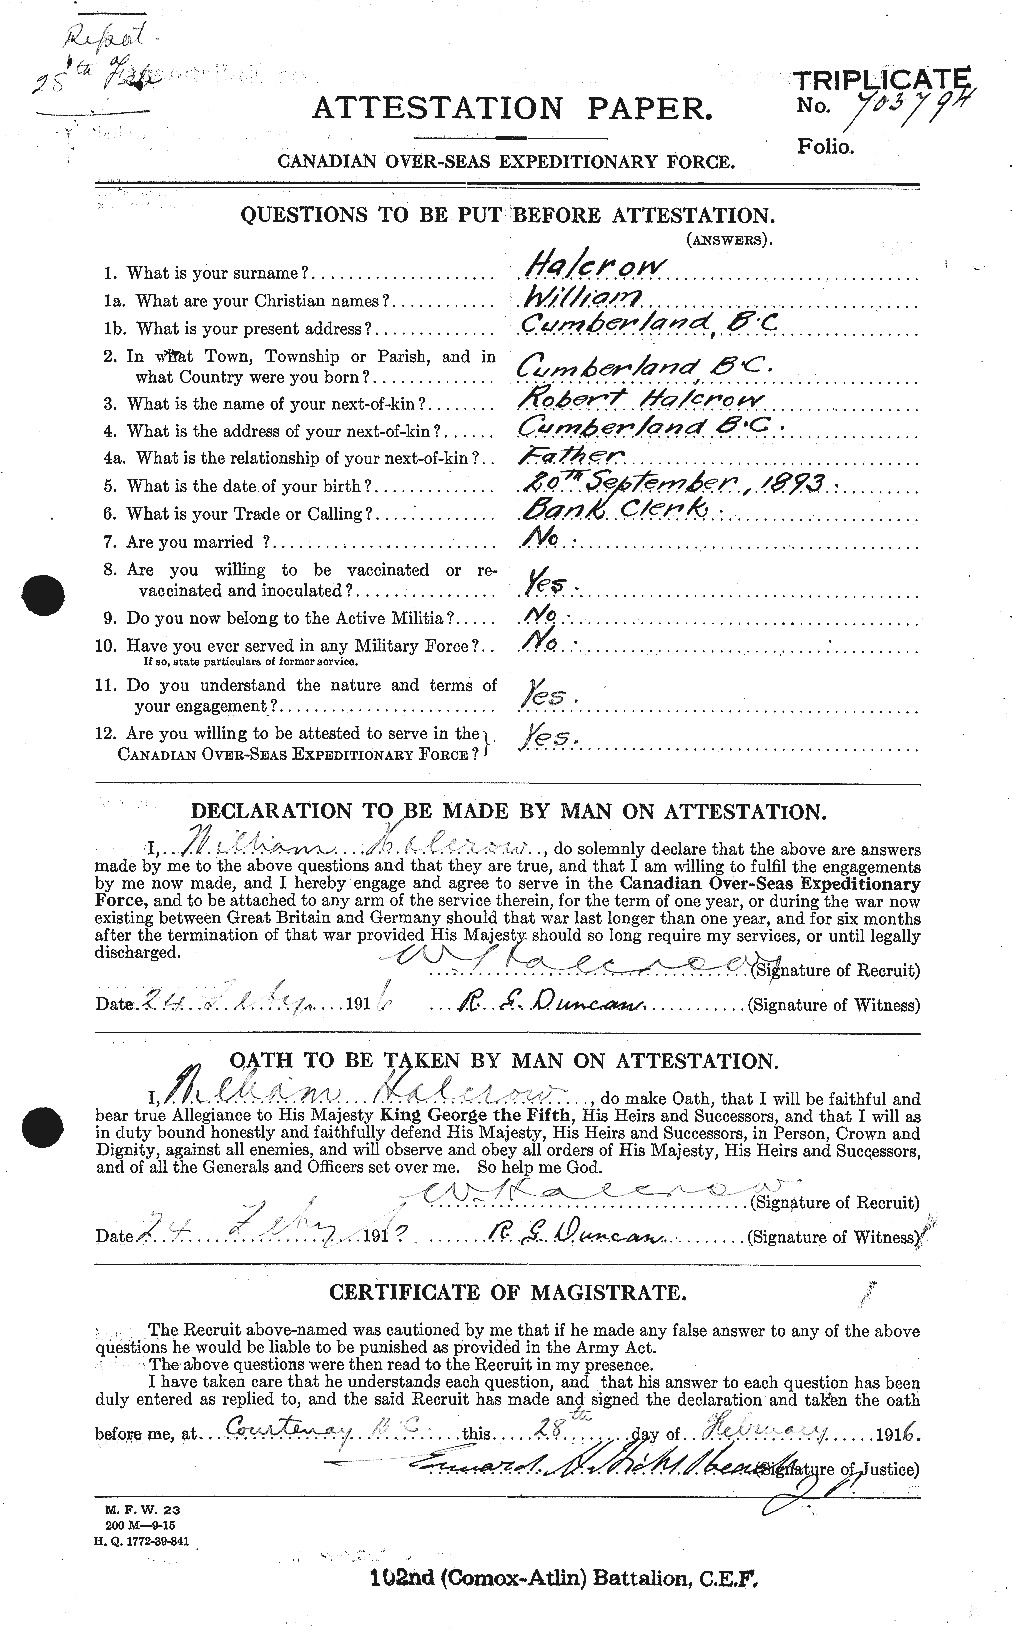 Personnel Records of the First World War - CEF 370305a